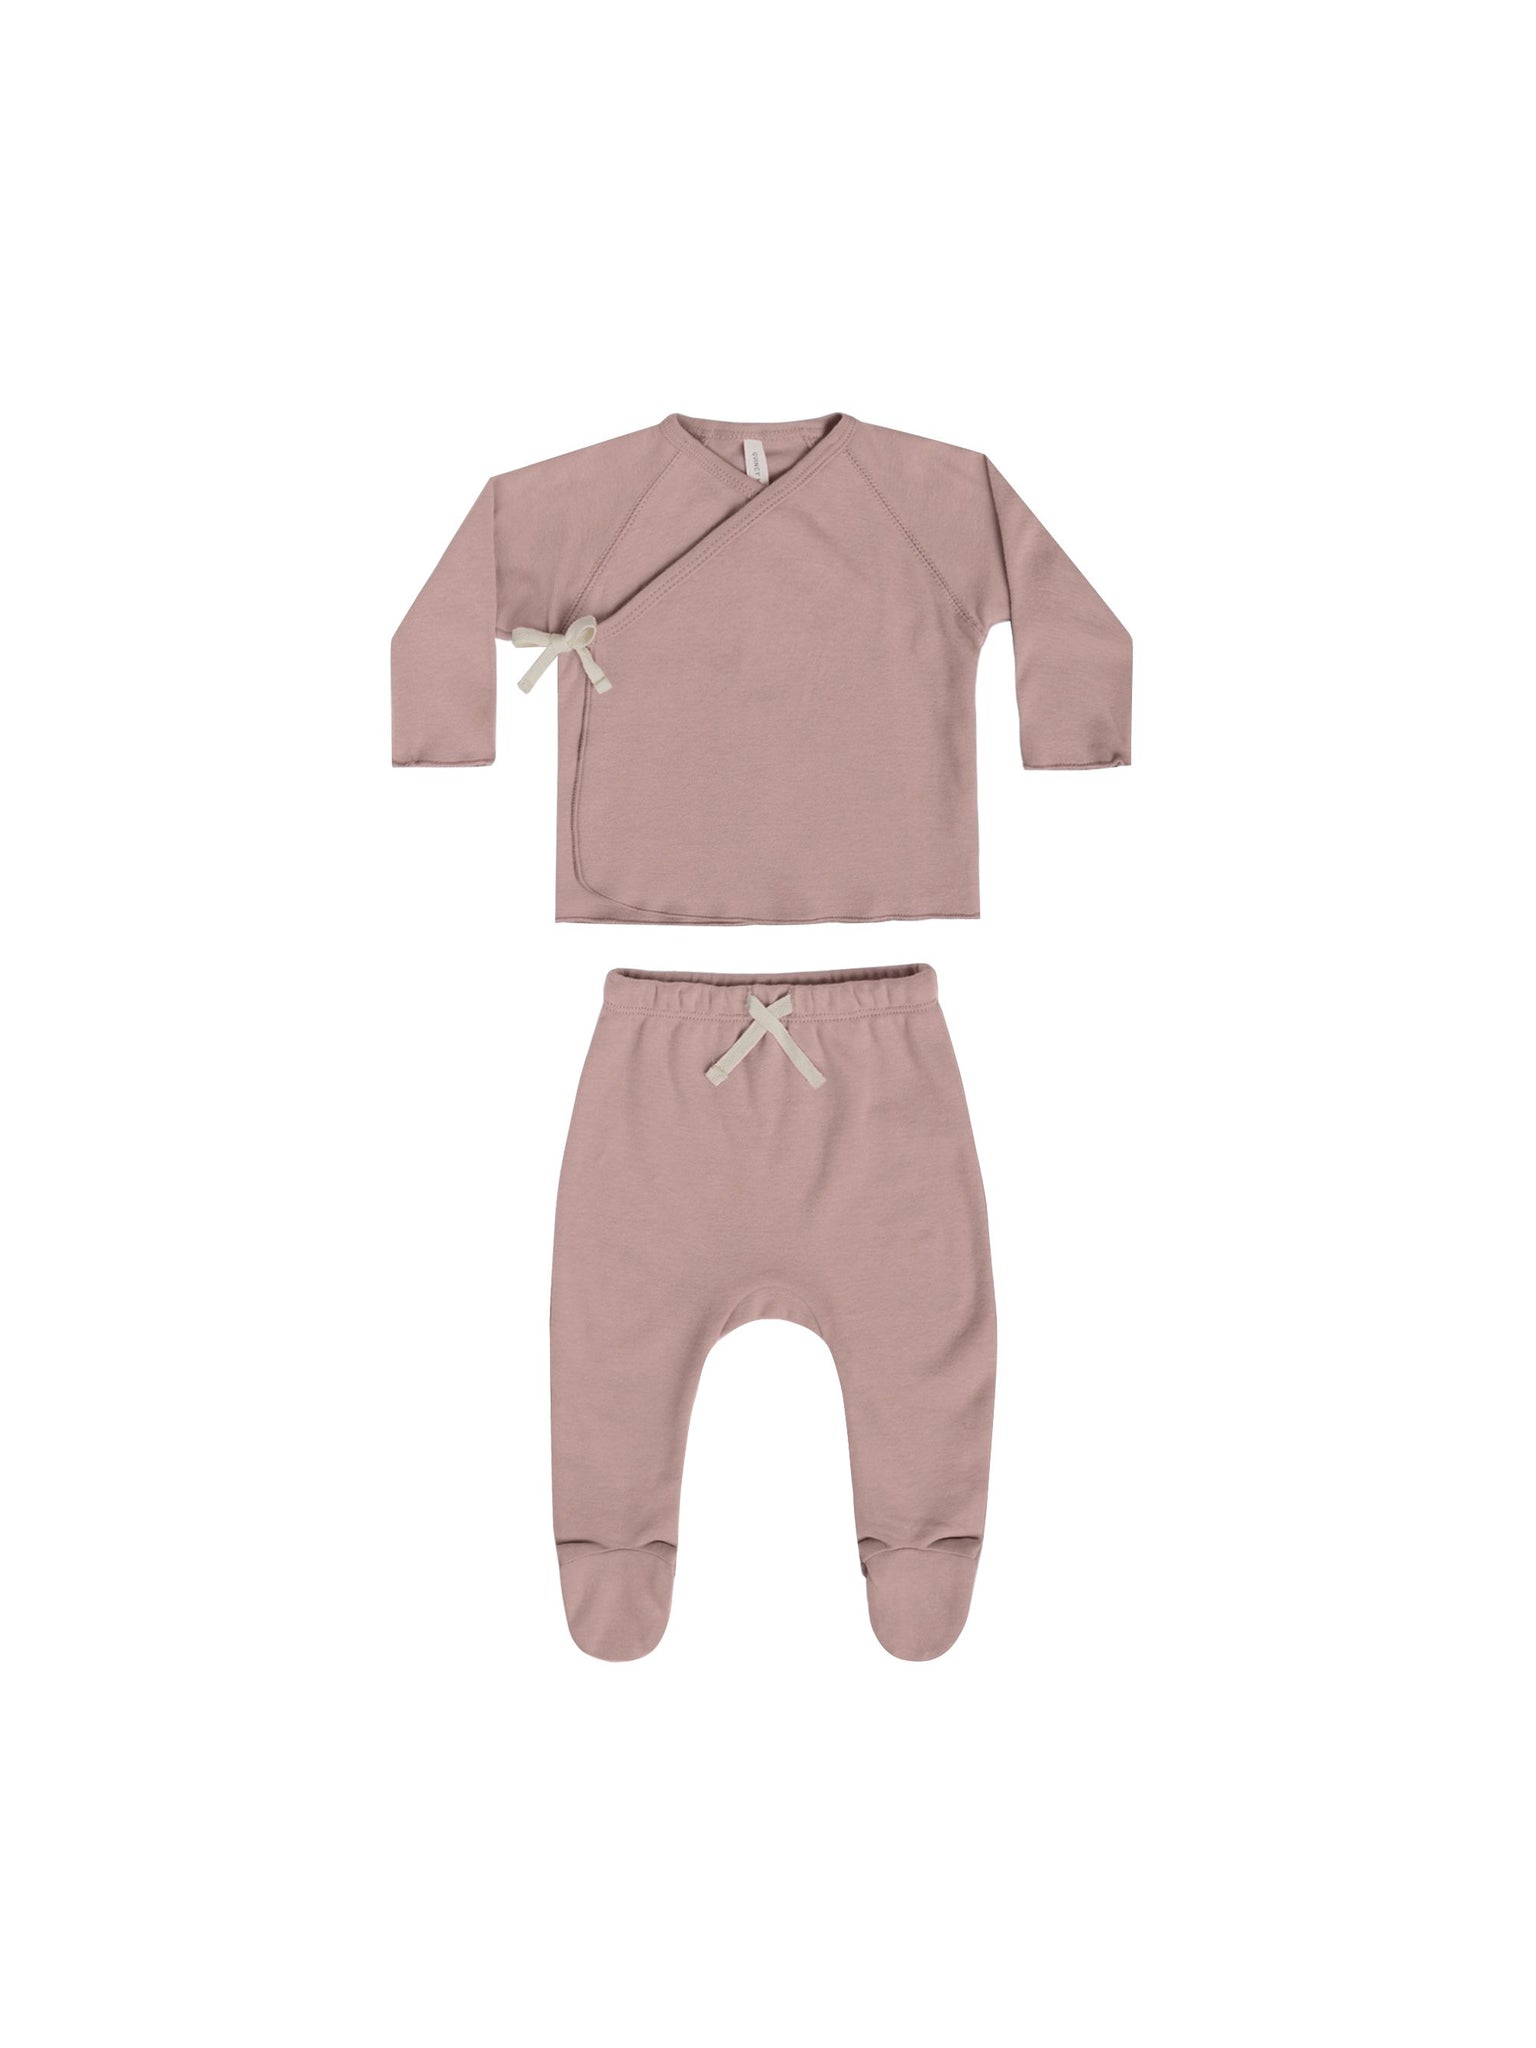 Lilac Pointelle Wrap Top + Footed Pant Set